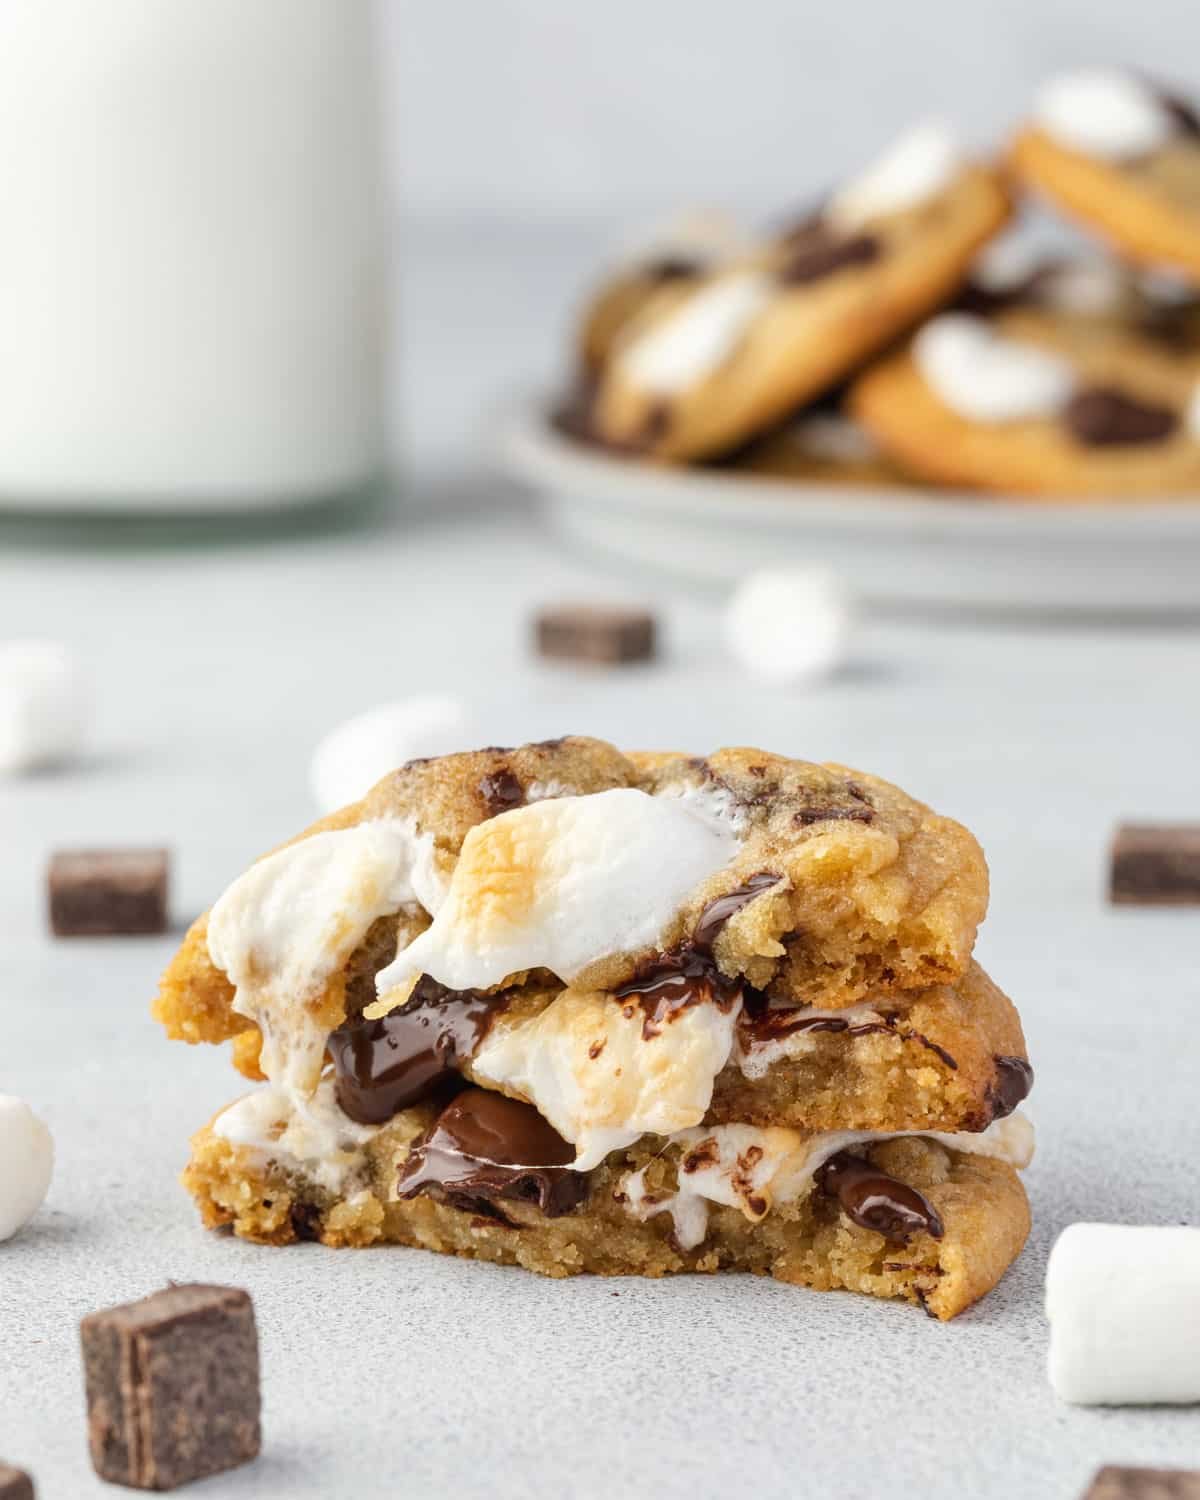 3 halves of cookies stacked on each other with chocolate and marshmallow oozing down the stack.